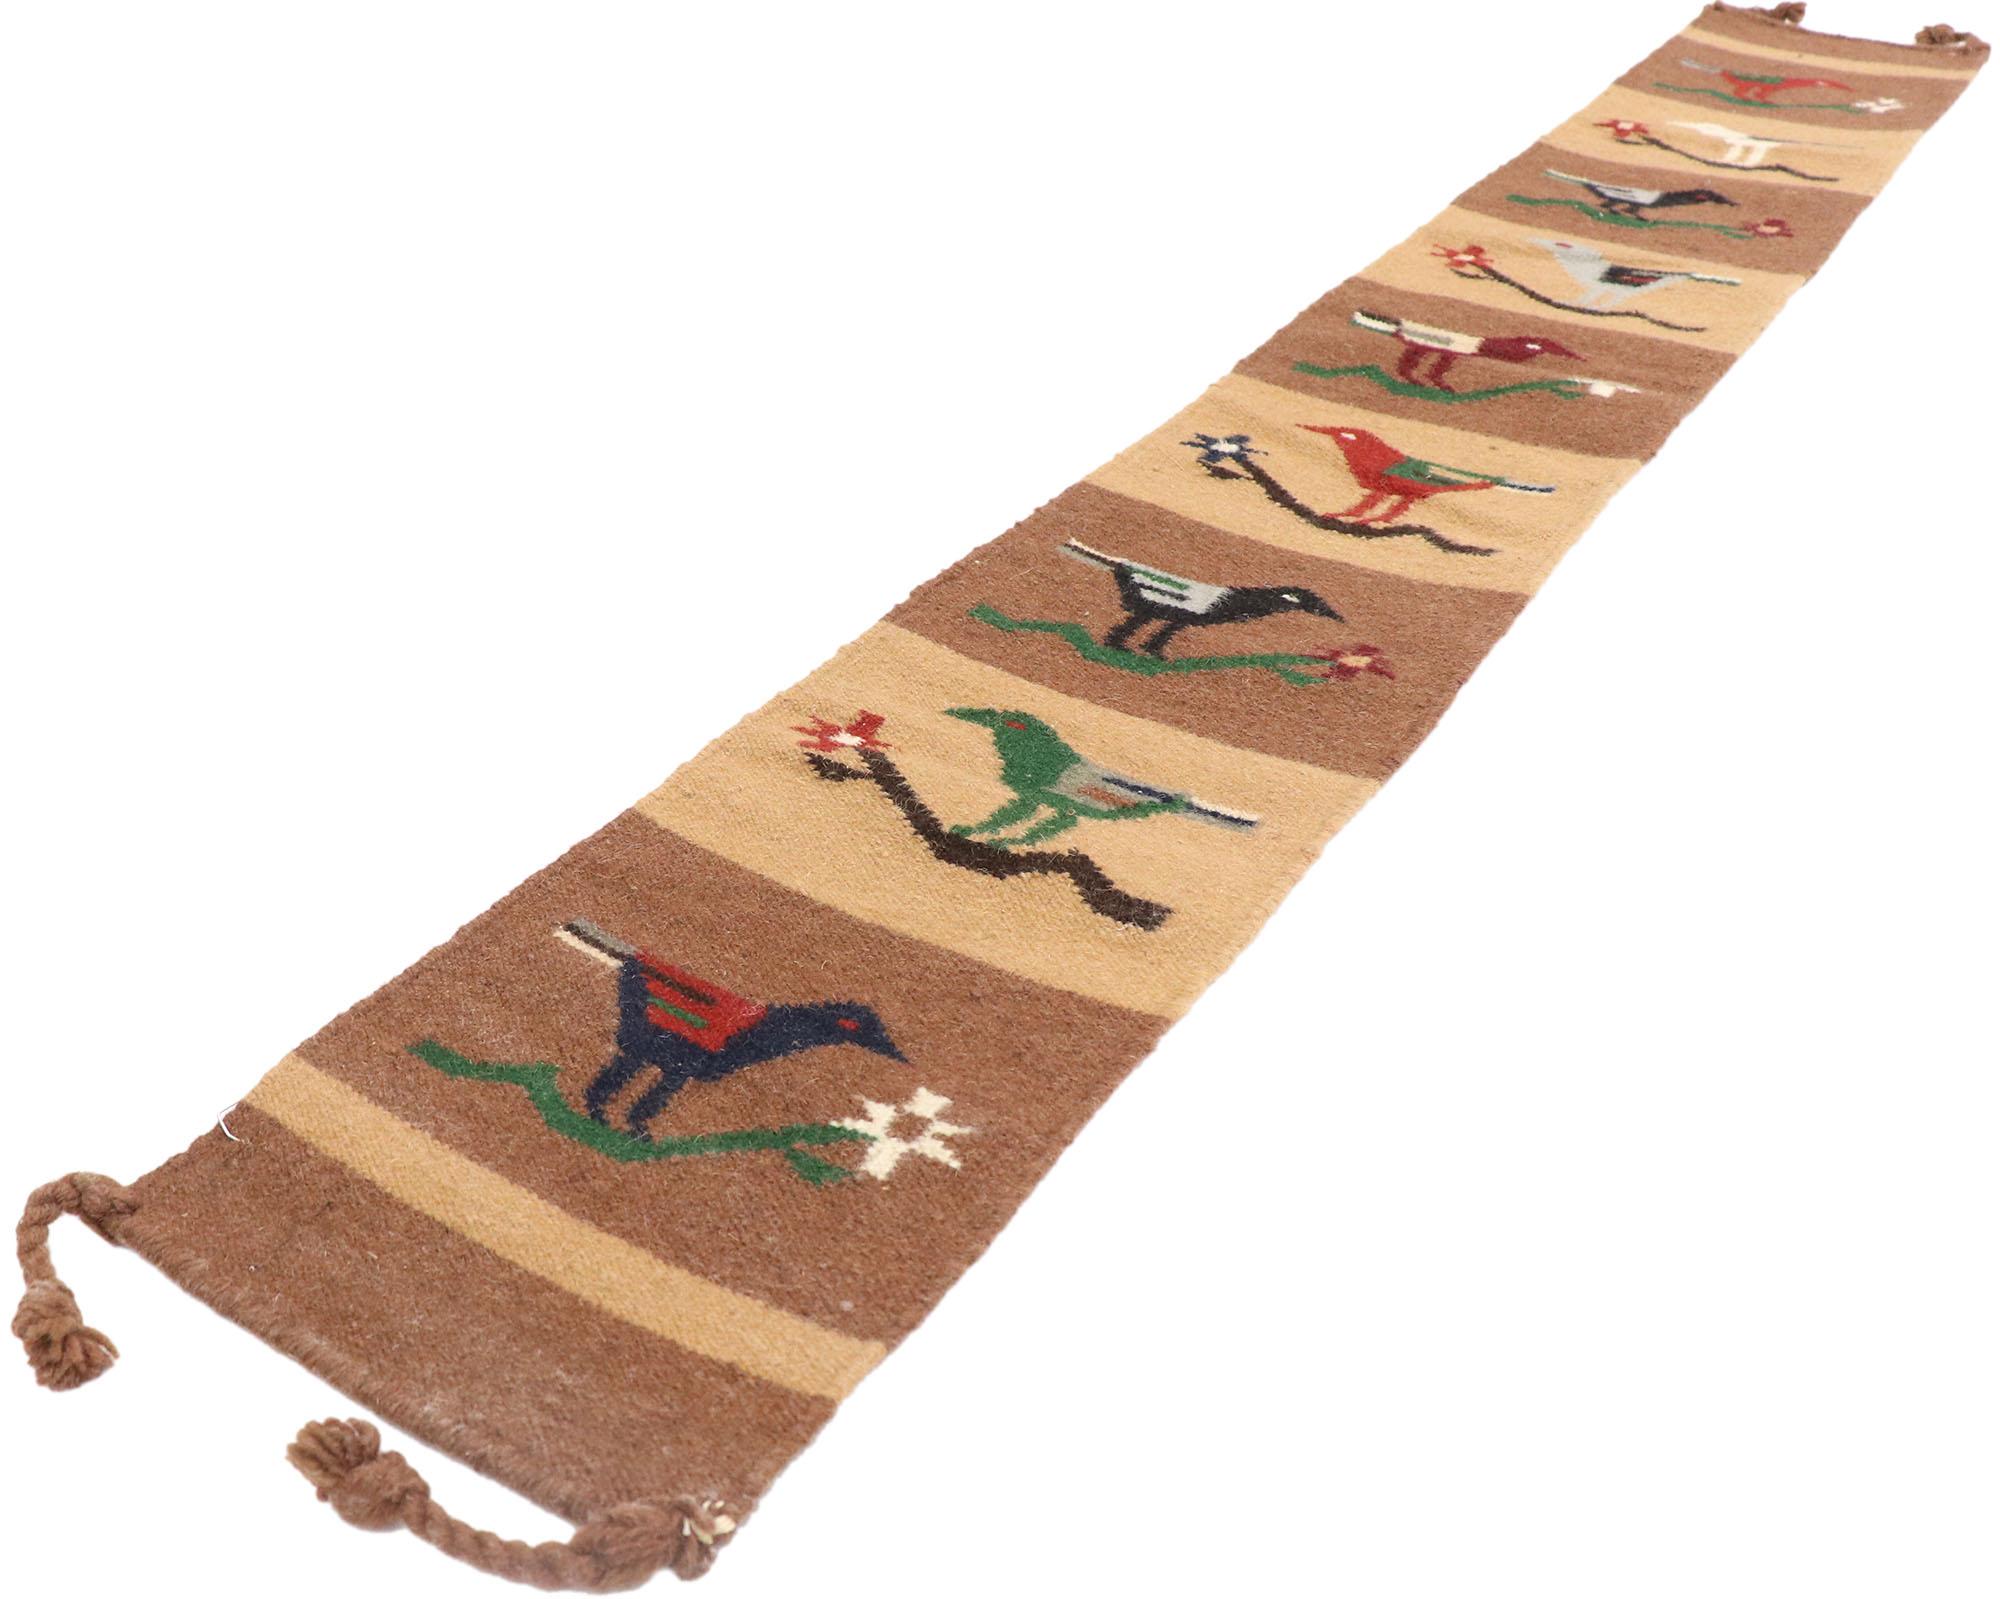 77983 Vintage Persian Kilim Runner 0'11 x 06'07. Reminiscences of an exotic journey and worldly sophistication, this handwoven wool vintage Persian kilim runner is a captivating vision of woven beauty. The color blocked field features a bird on a